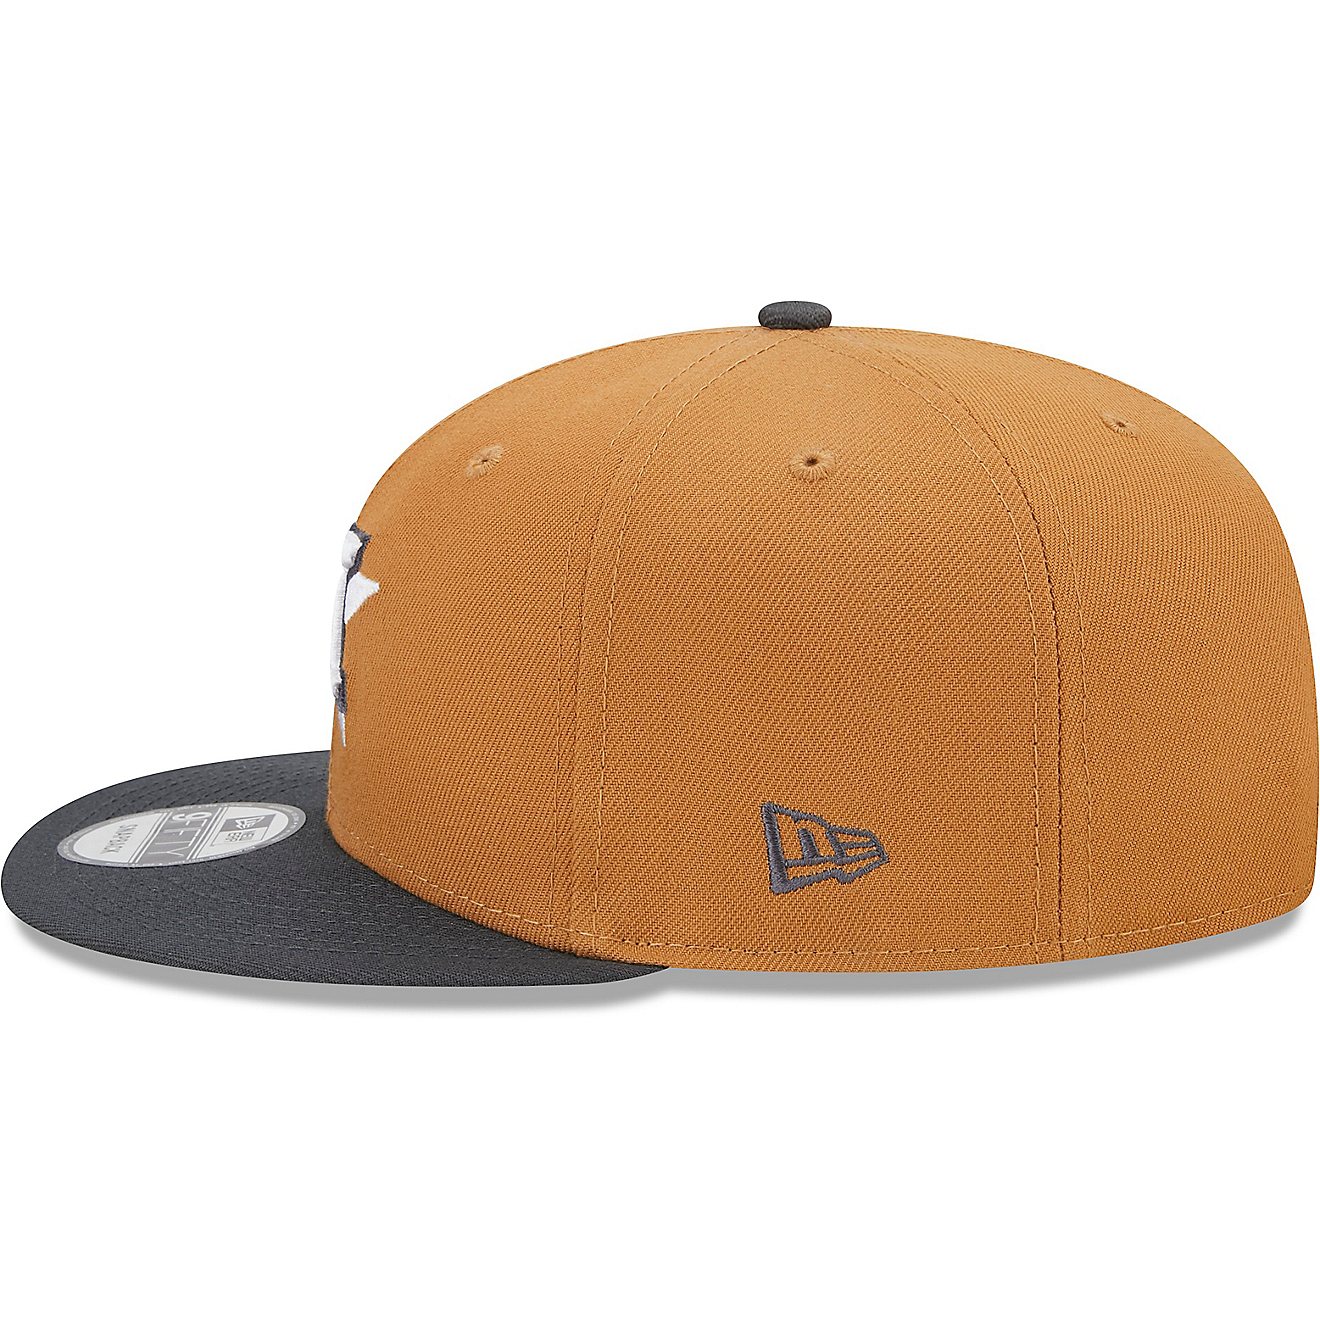 New Era Men's Houston Astros 2-Tone Pack 9FIFTY Cap                                                                              - view number 6